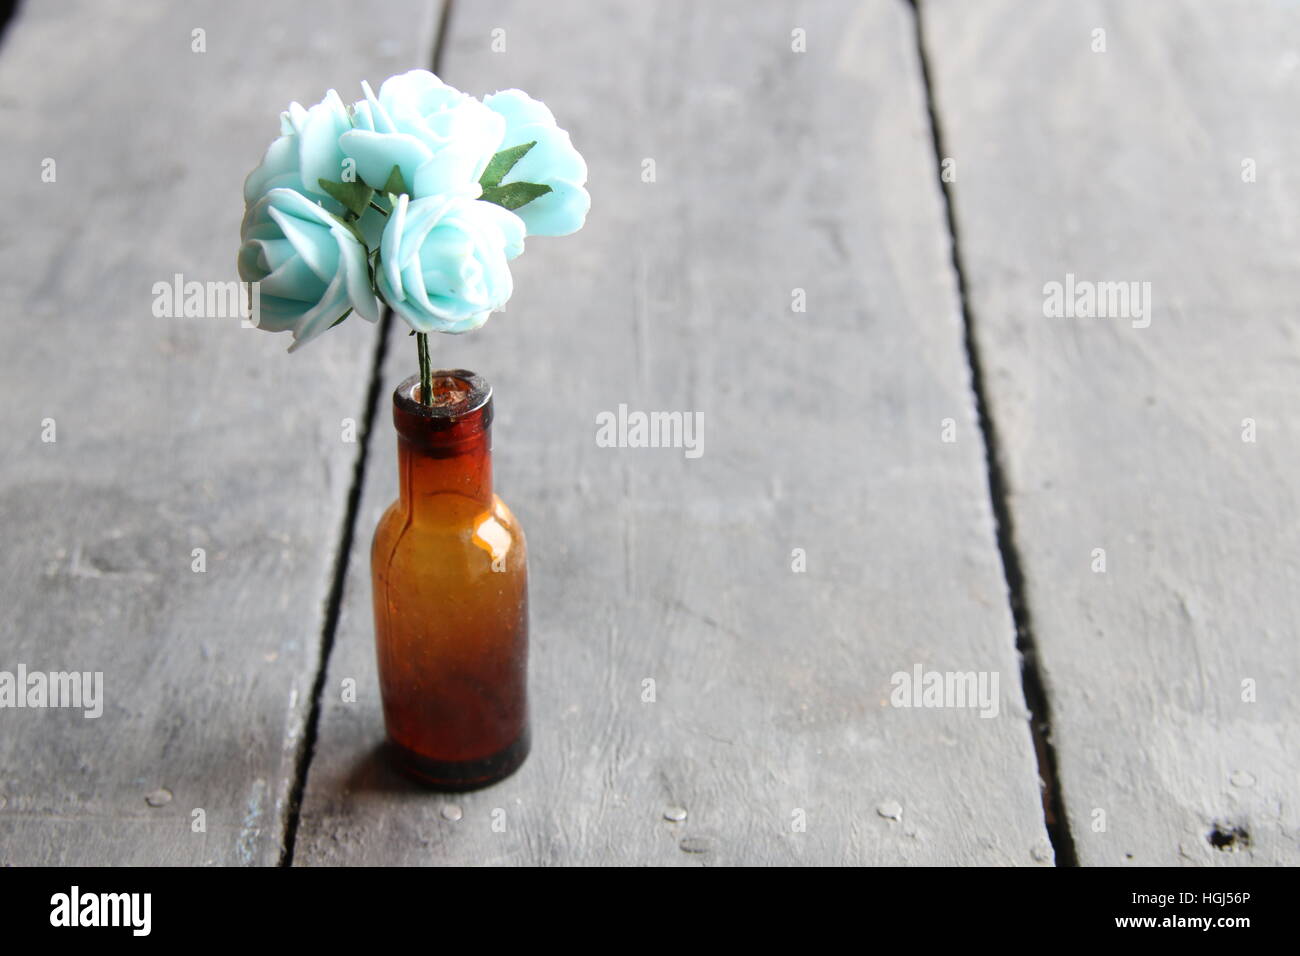 flowers in a bottle on wooden table Stock Photo